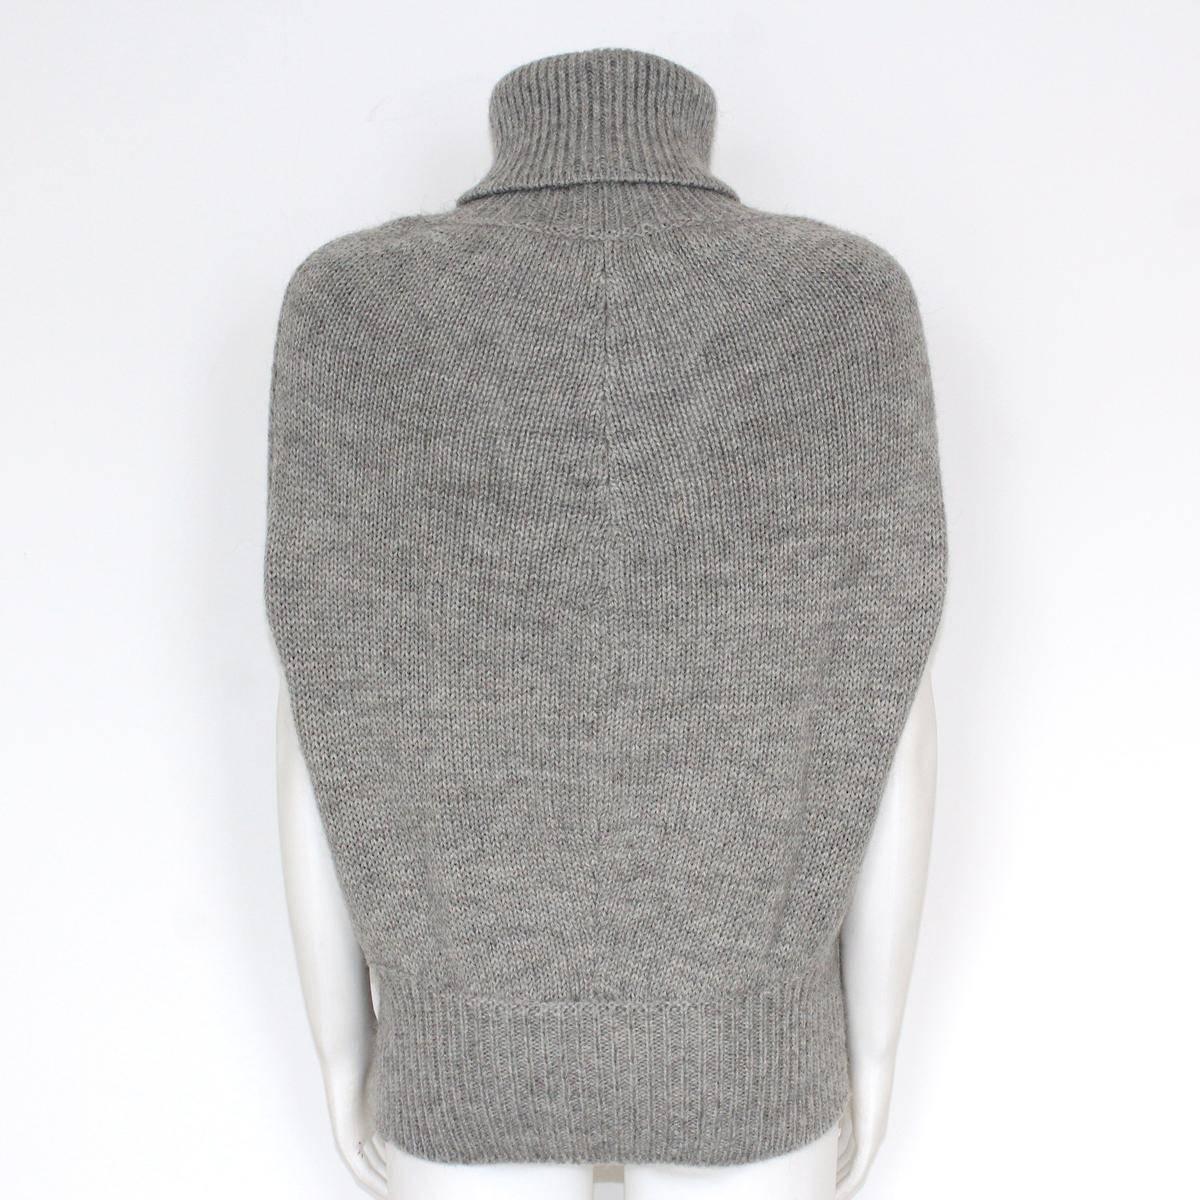 Top Quality & Design for this Gucci turtleneck
50% Alpaca, 50% Wool
Grey color
Twist work
Lenght cm 75 (29.5 inches)
Made in Italy
Worldwide express shipping included in the price !